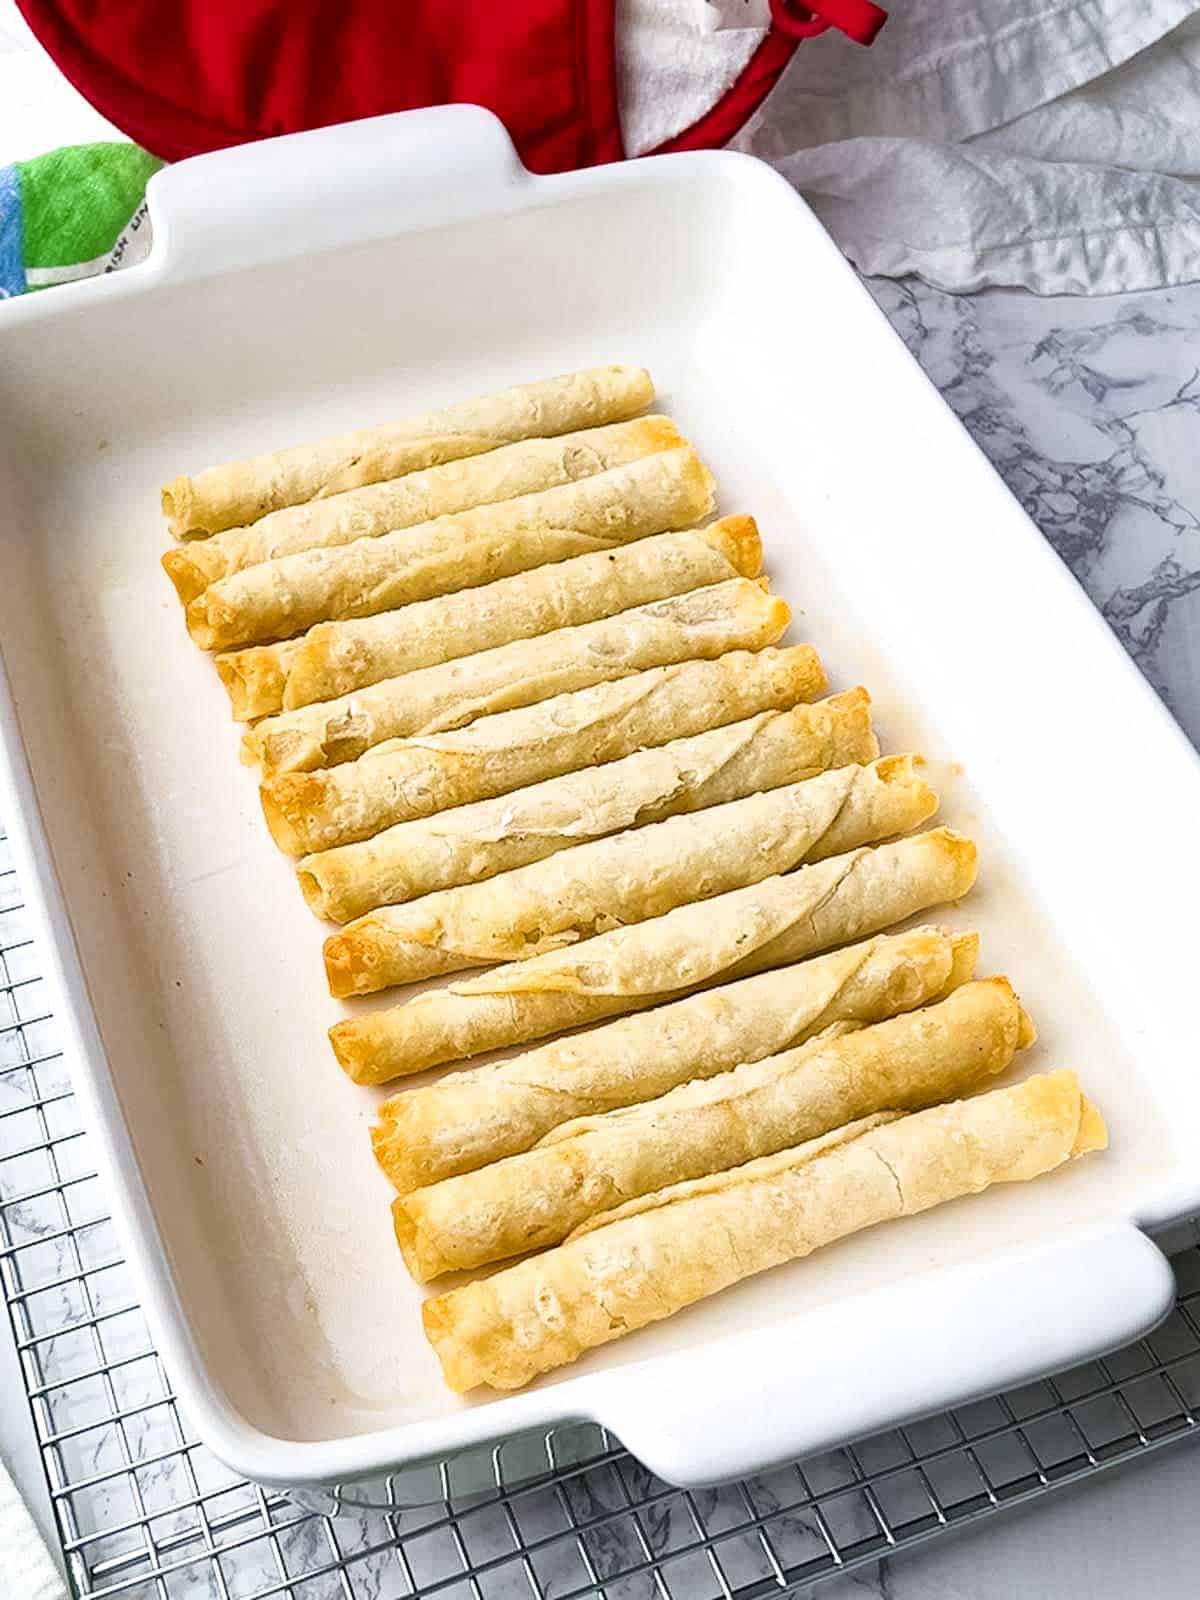 Browned taquitos in baking dish.